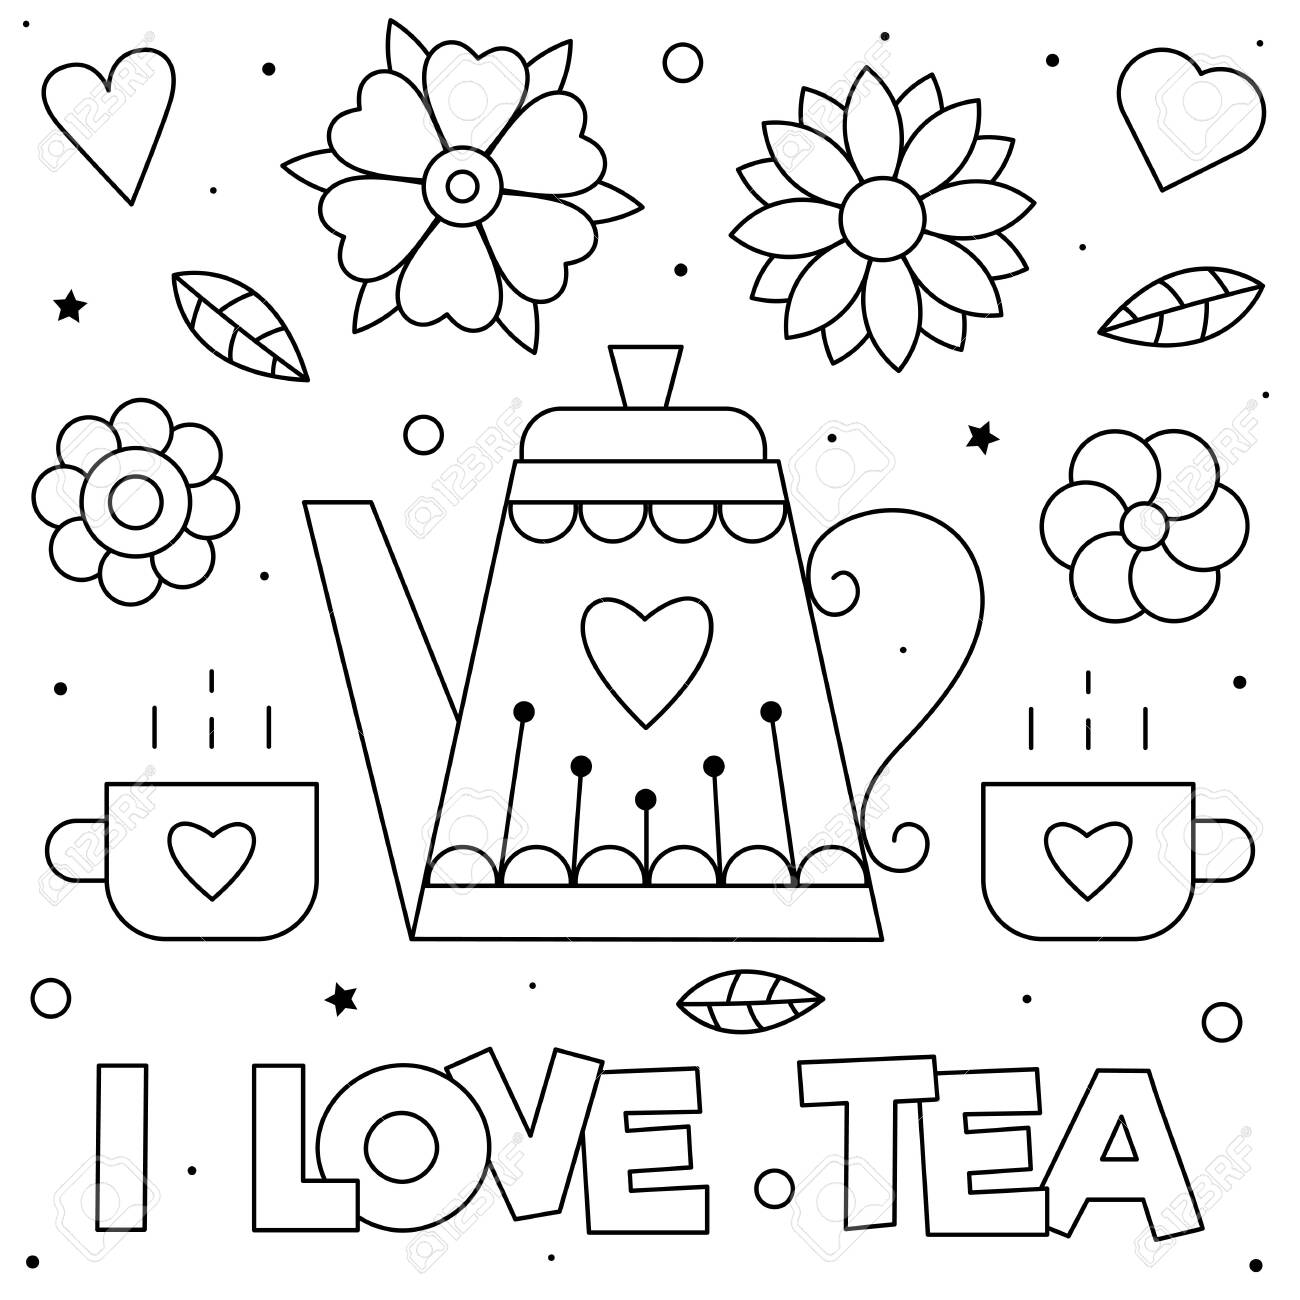 I love tea coloring page illustration cups and teapot royalty free svg cliparts vectors and stock illustration image